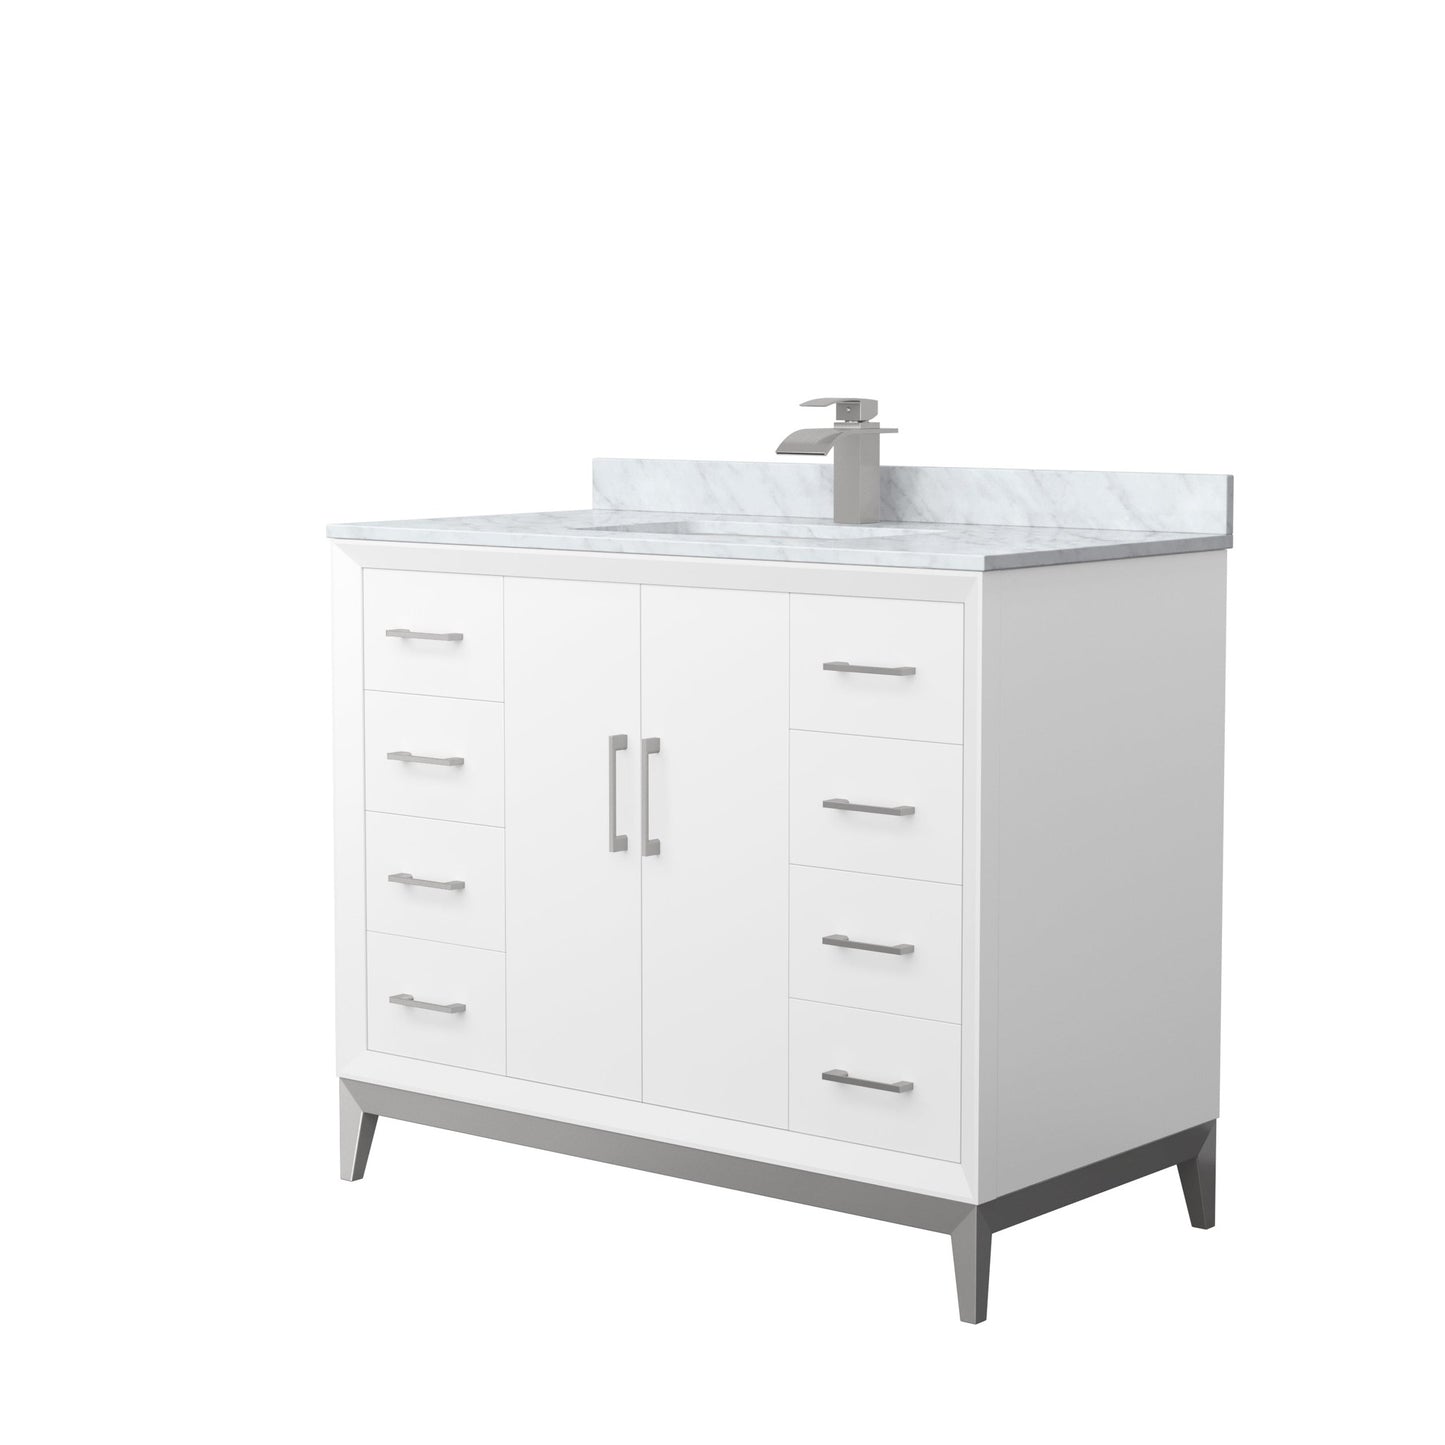 Wyndham Collection Amici 42" Single Bathroom Vanity in White, White Carrara Marble Countertop, Undermount Square Sink, Brushed Nickel Trim